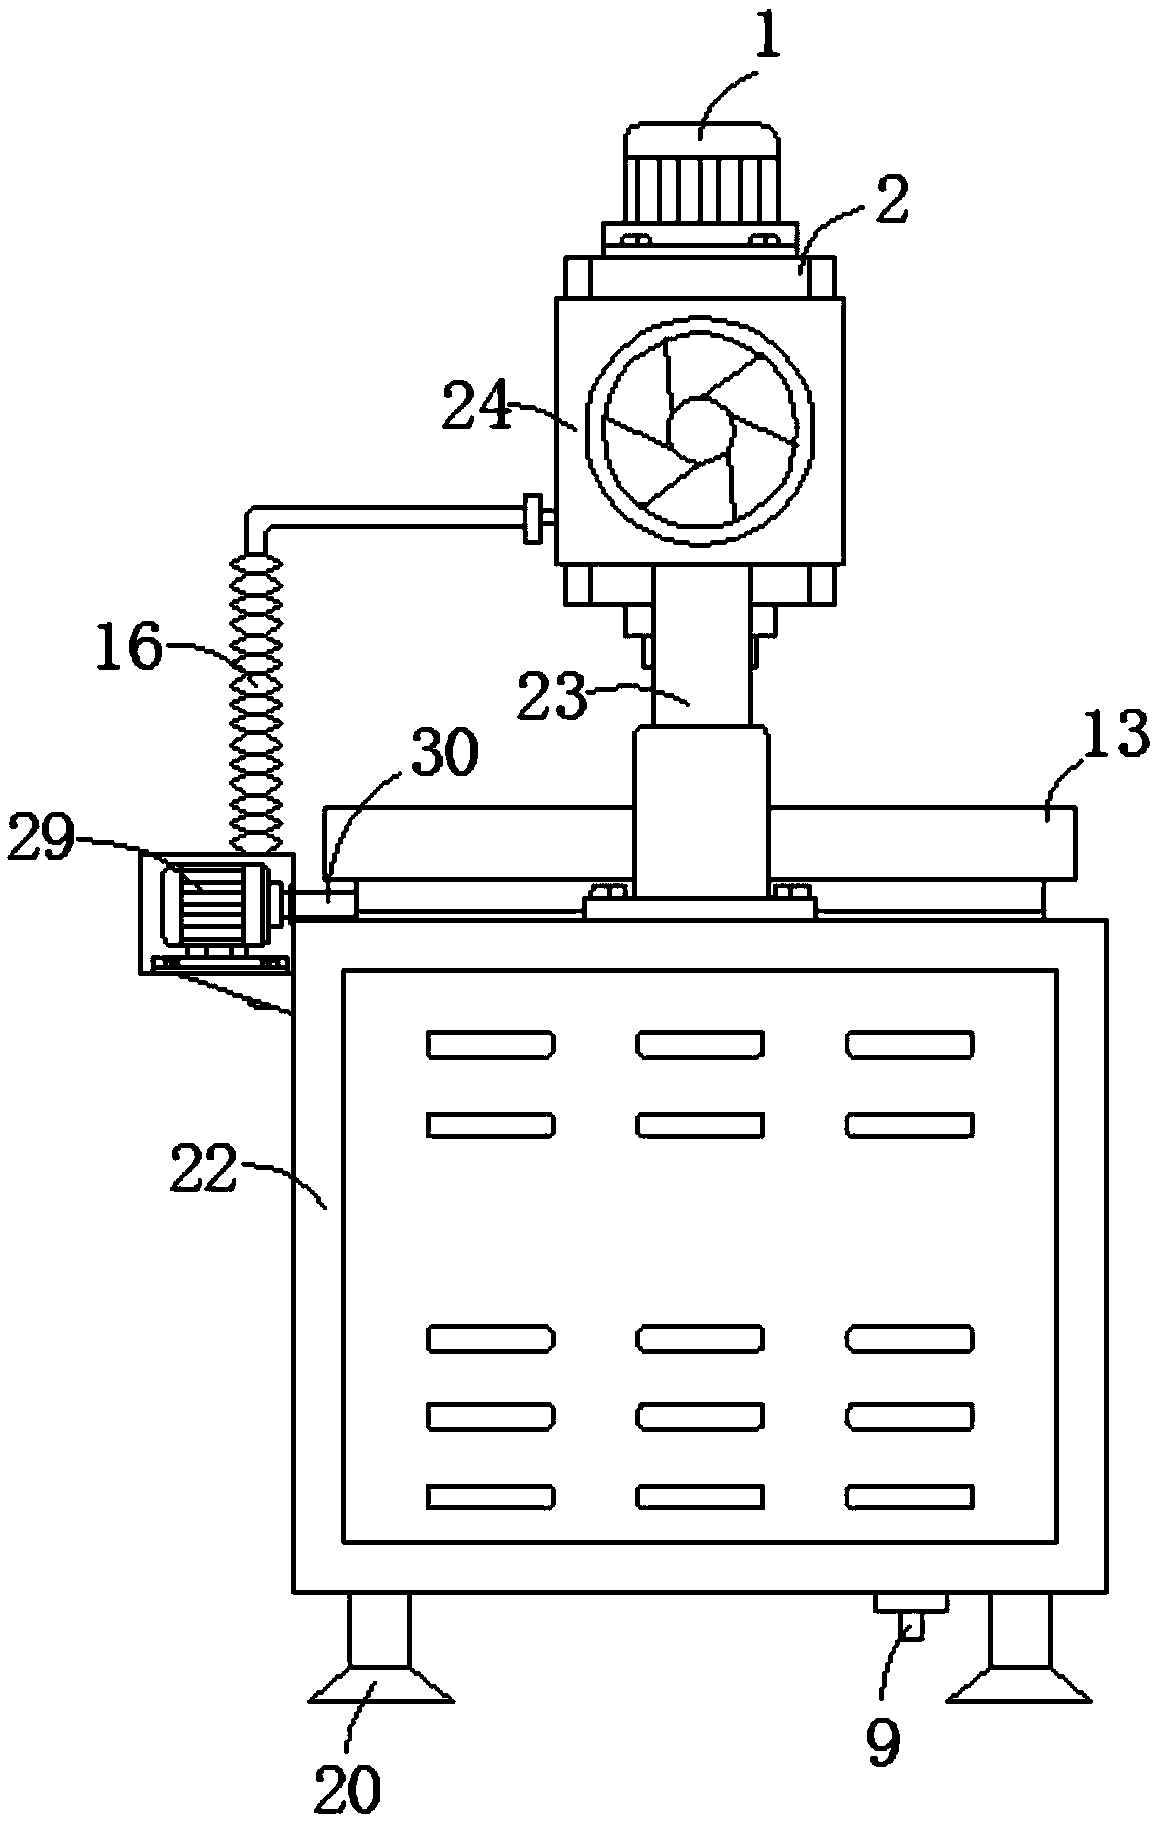 Numerically-controlled slot broaching device for furniture board processing